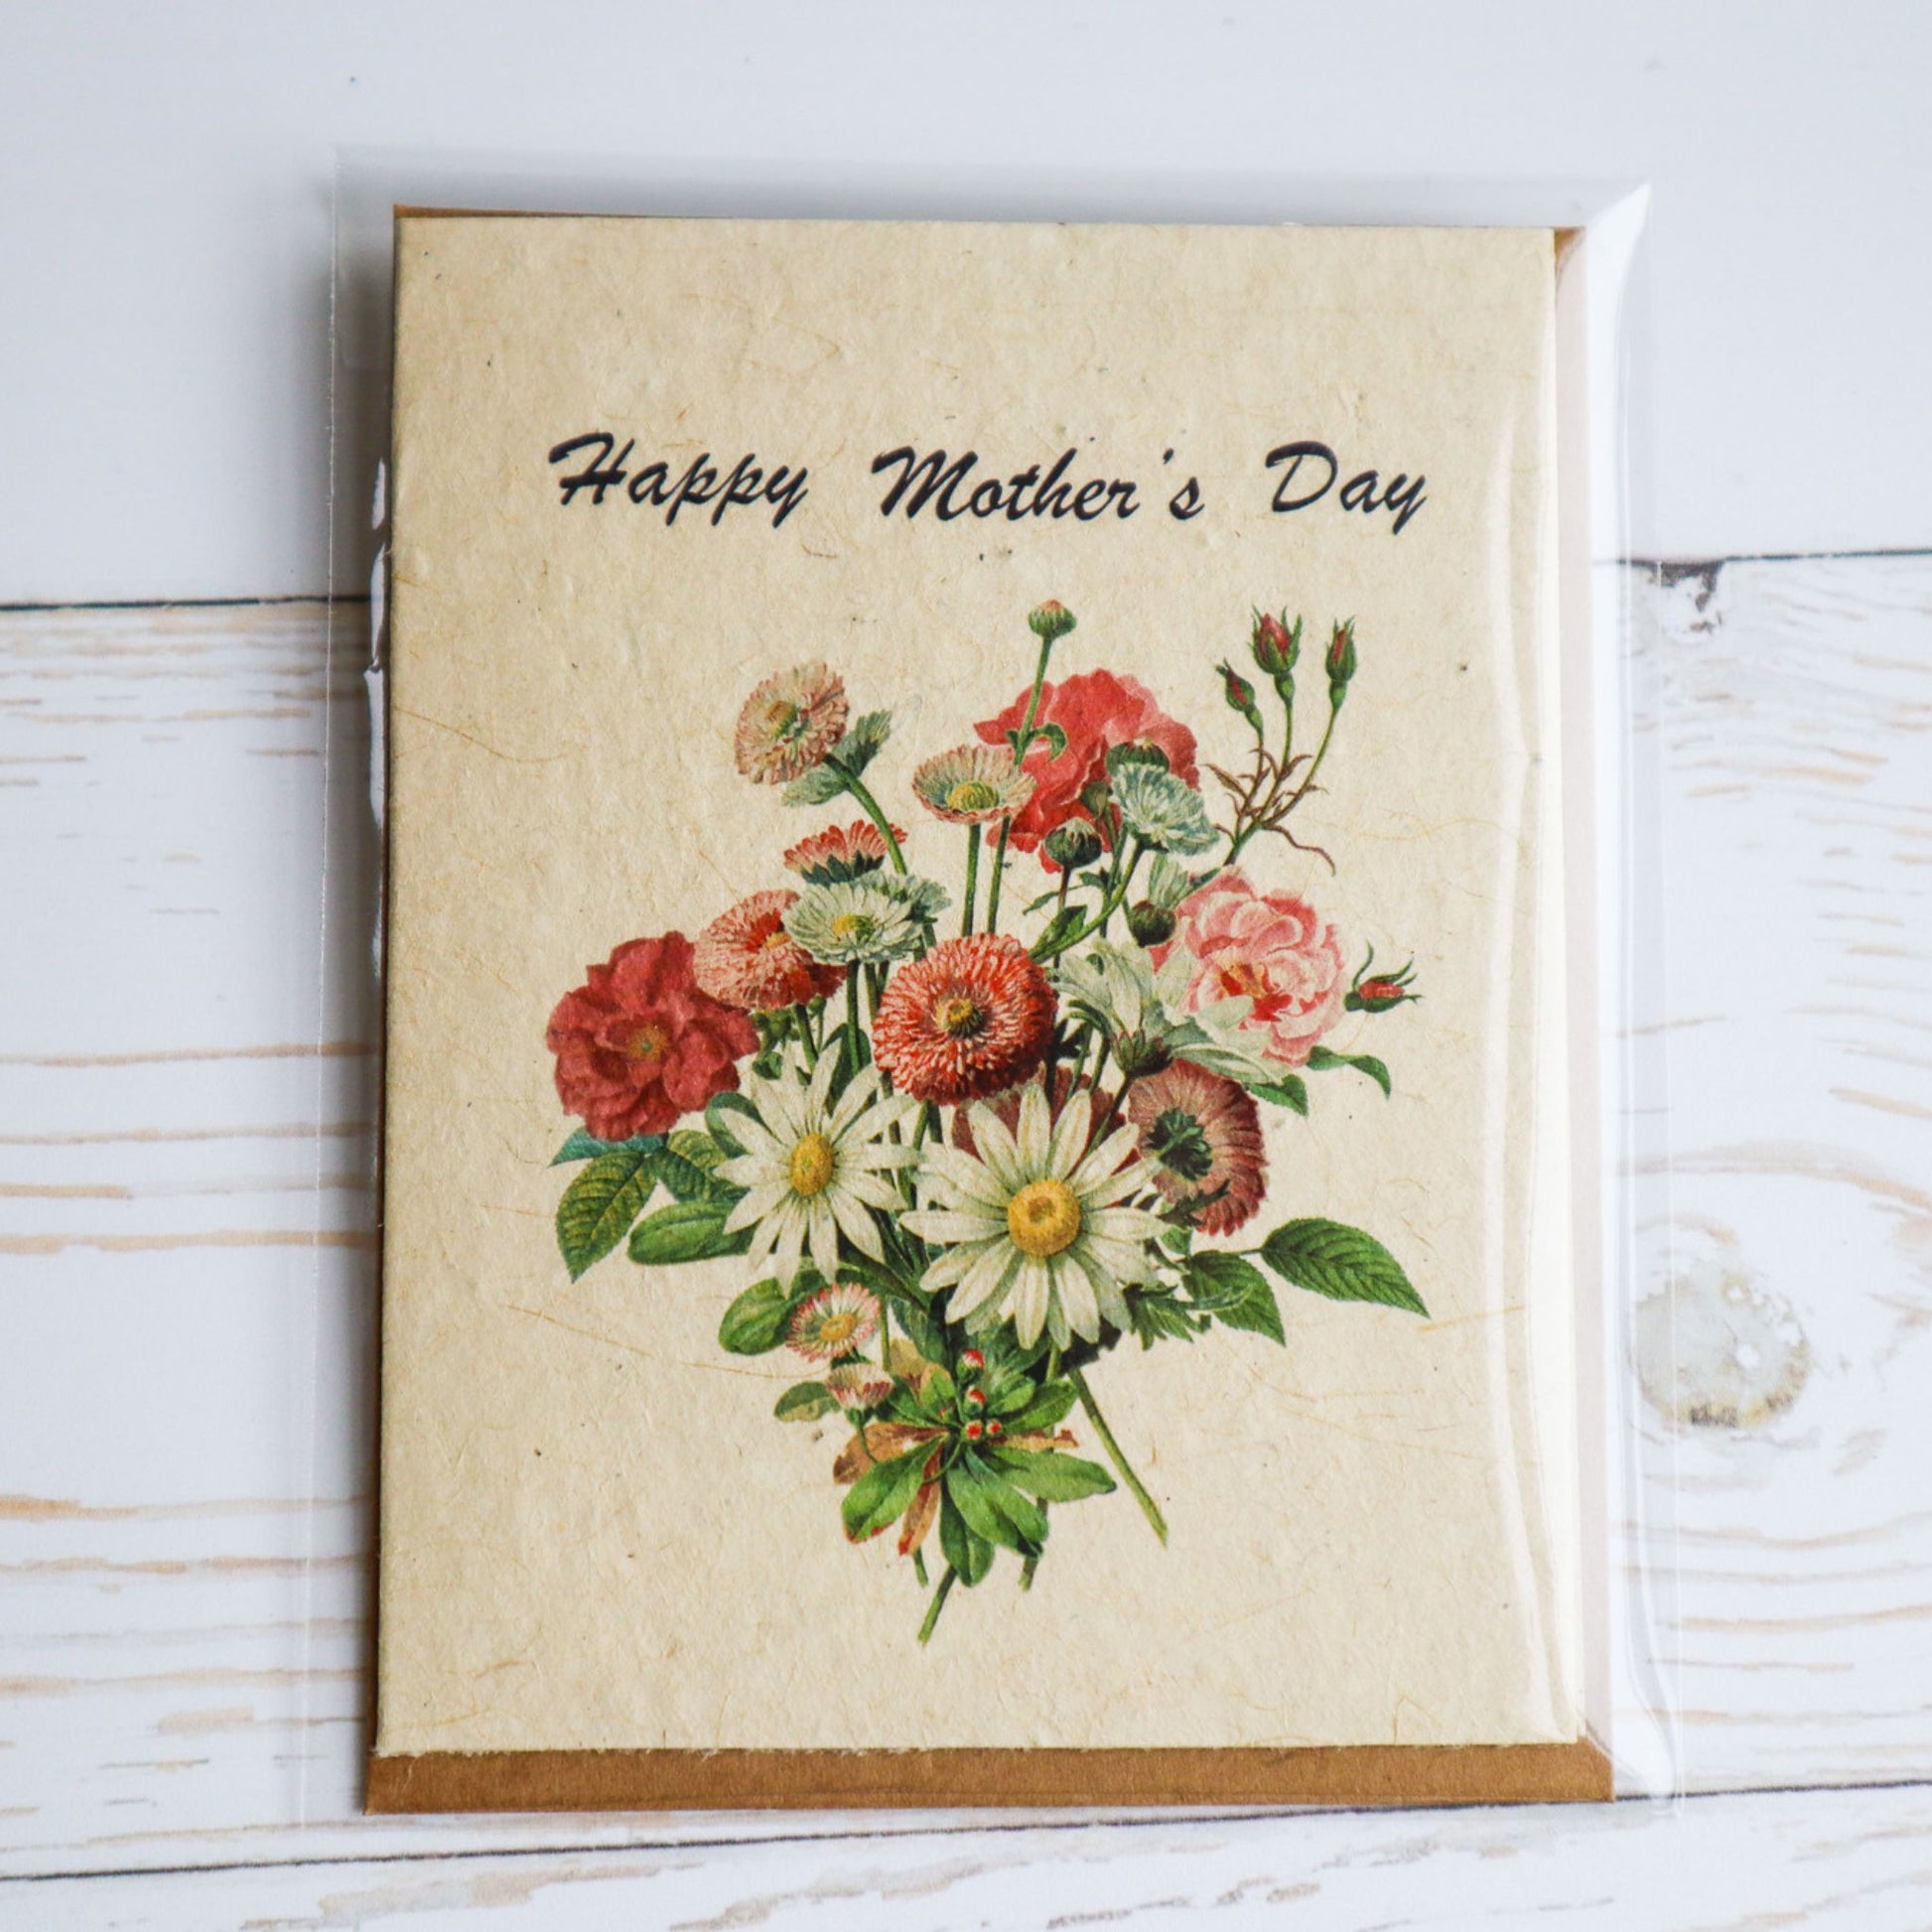 Happy Mother's Day plantable flower seed paper card with floral bouquet and kraft envelope. Comes in biodegradable sleeve.